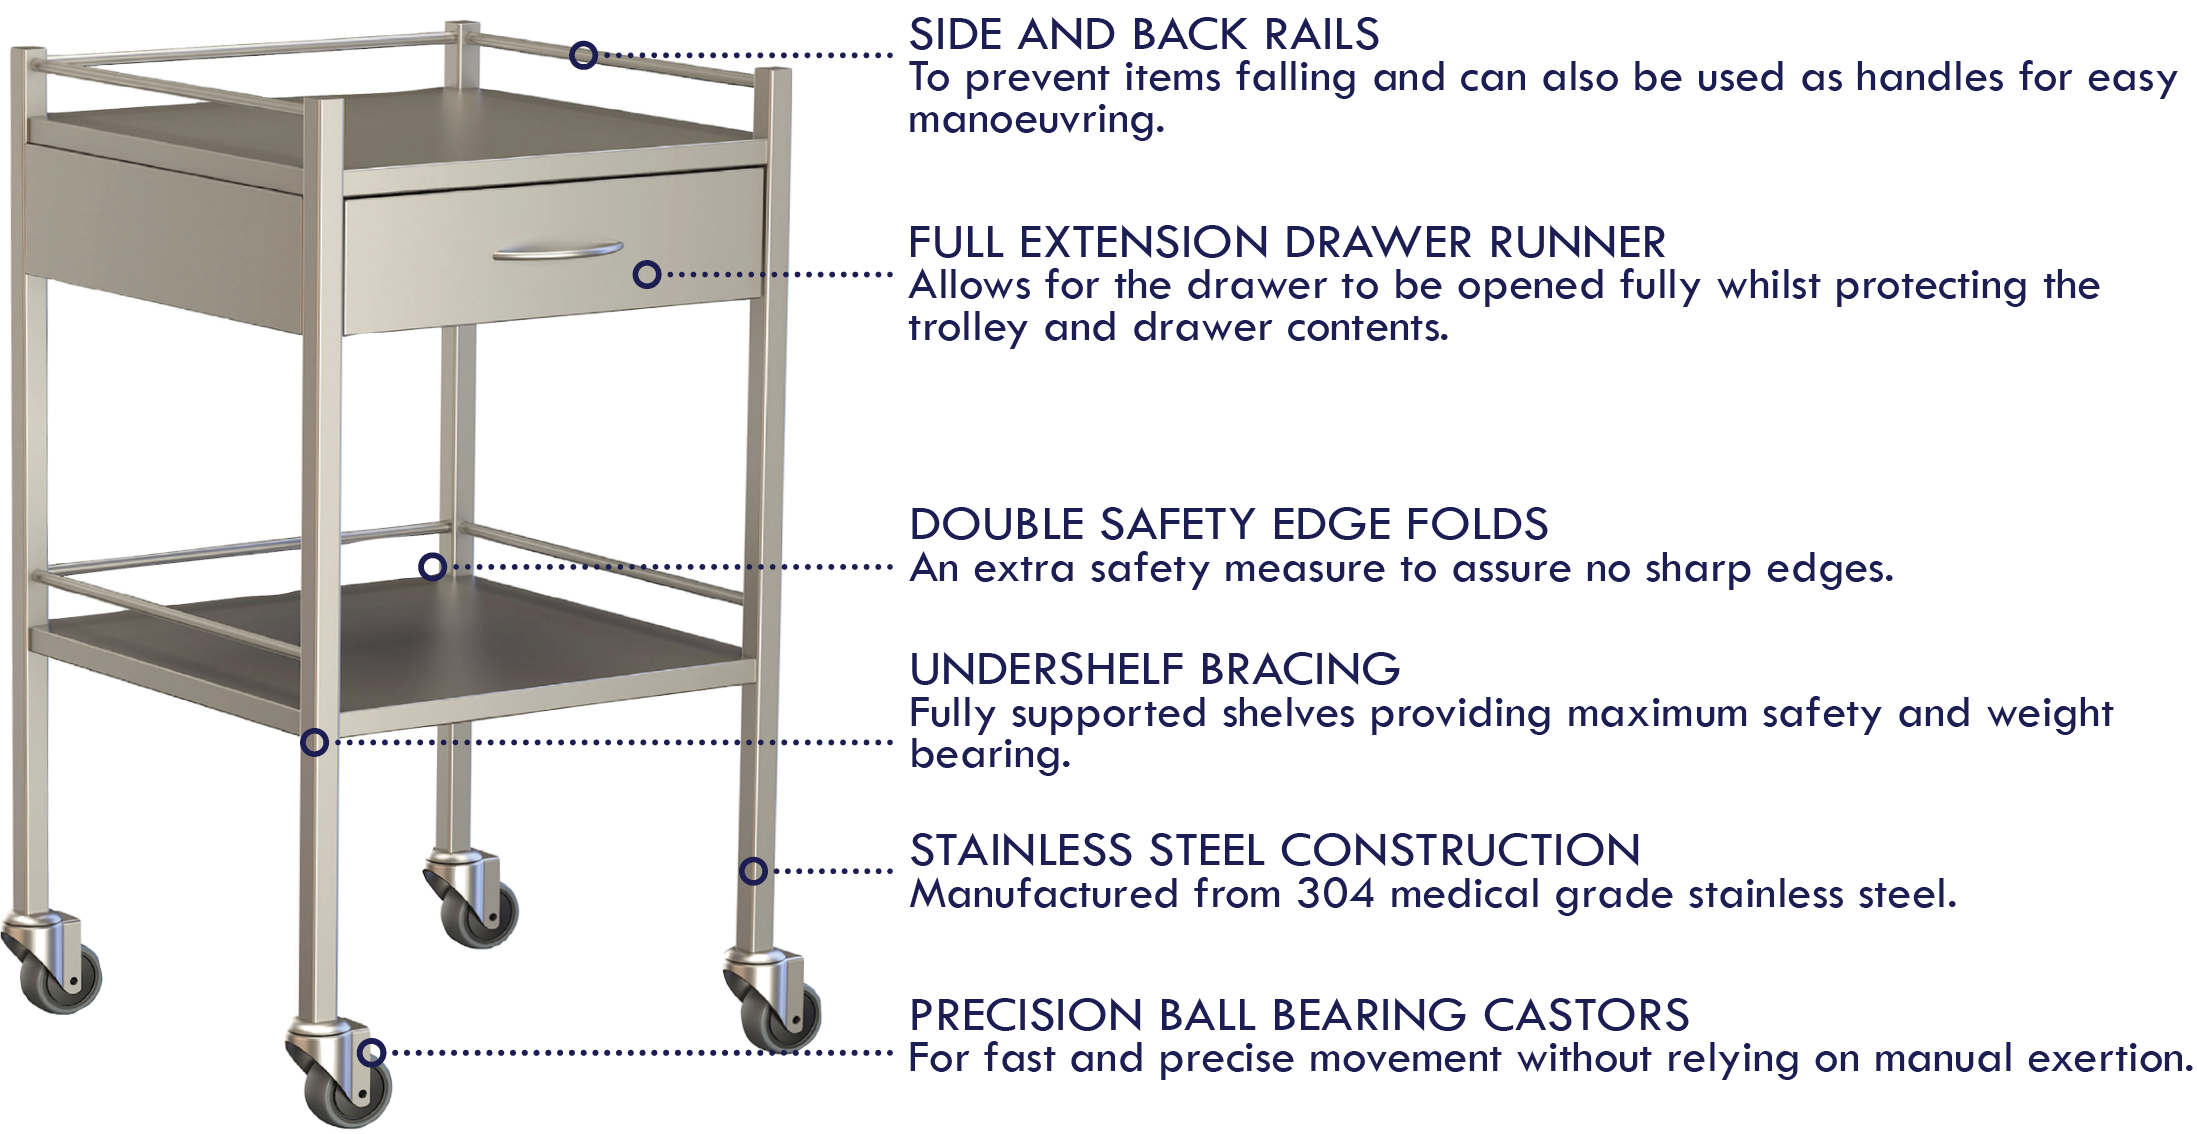 Signature Clinical Furniture Trolley Features